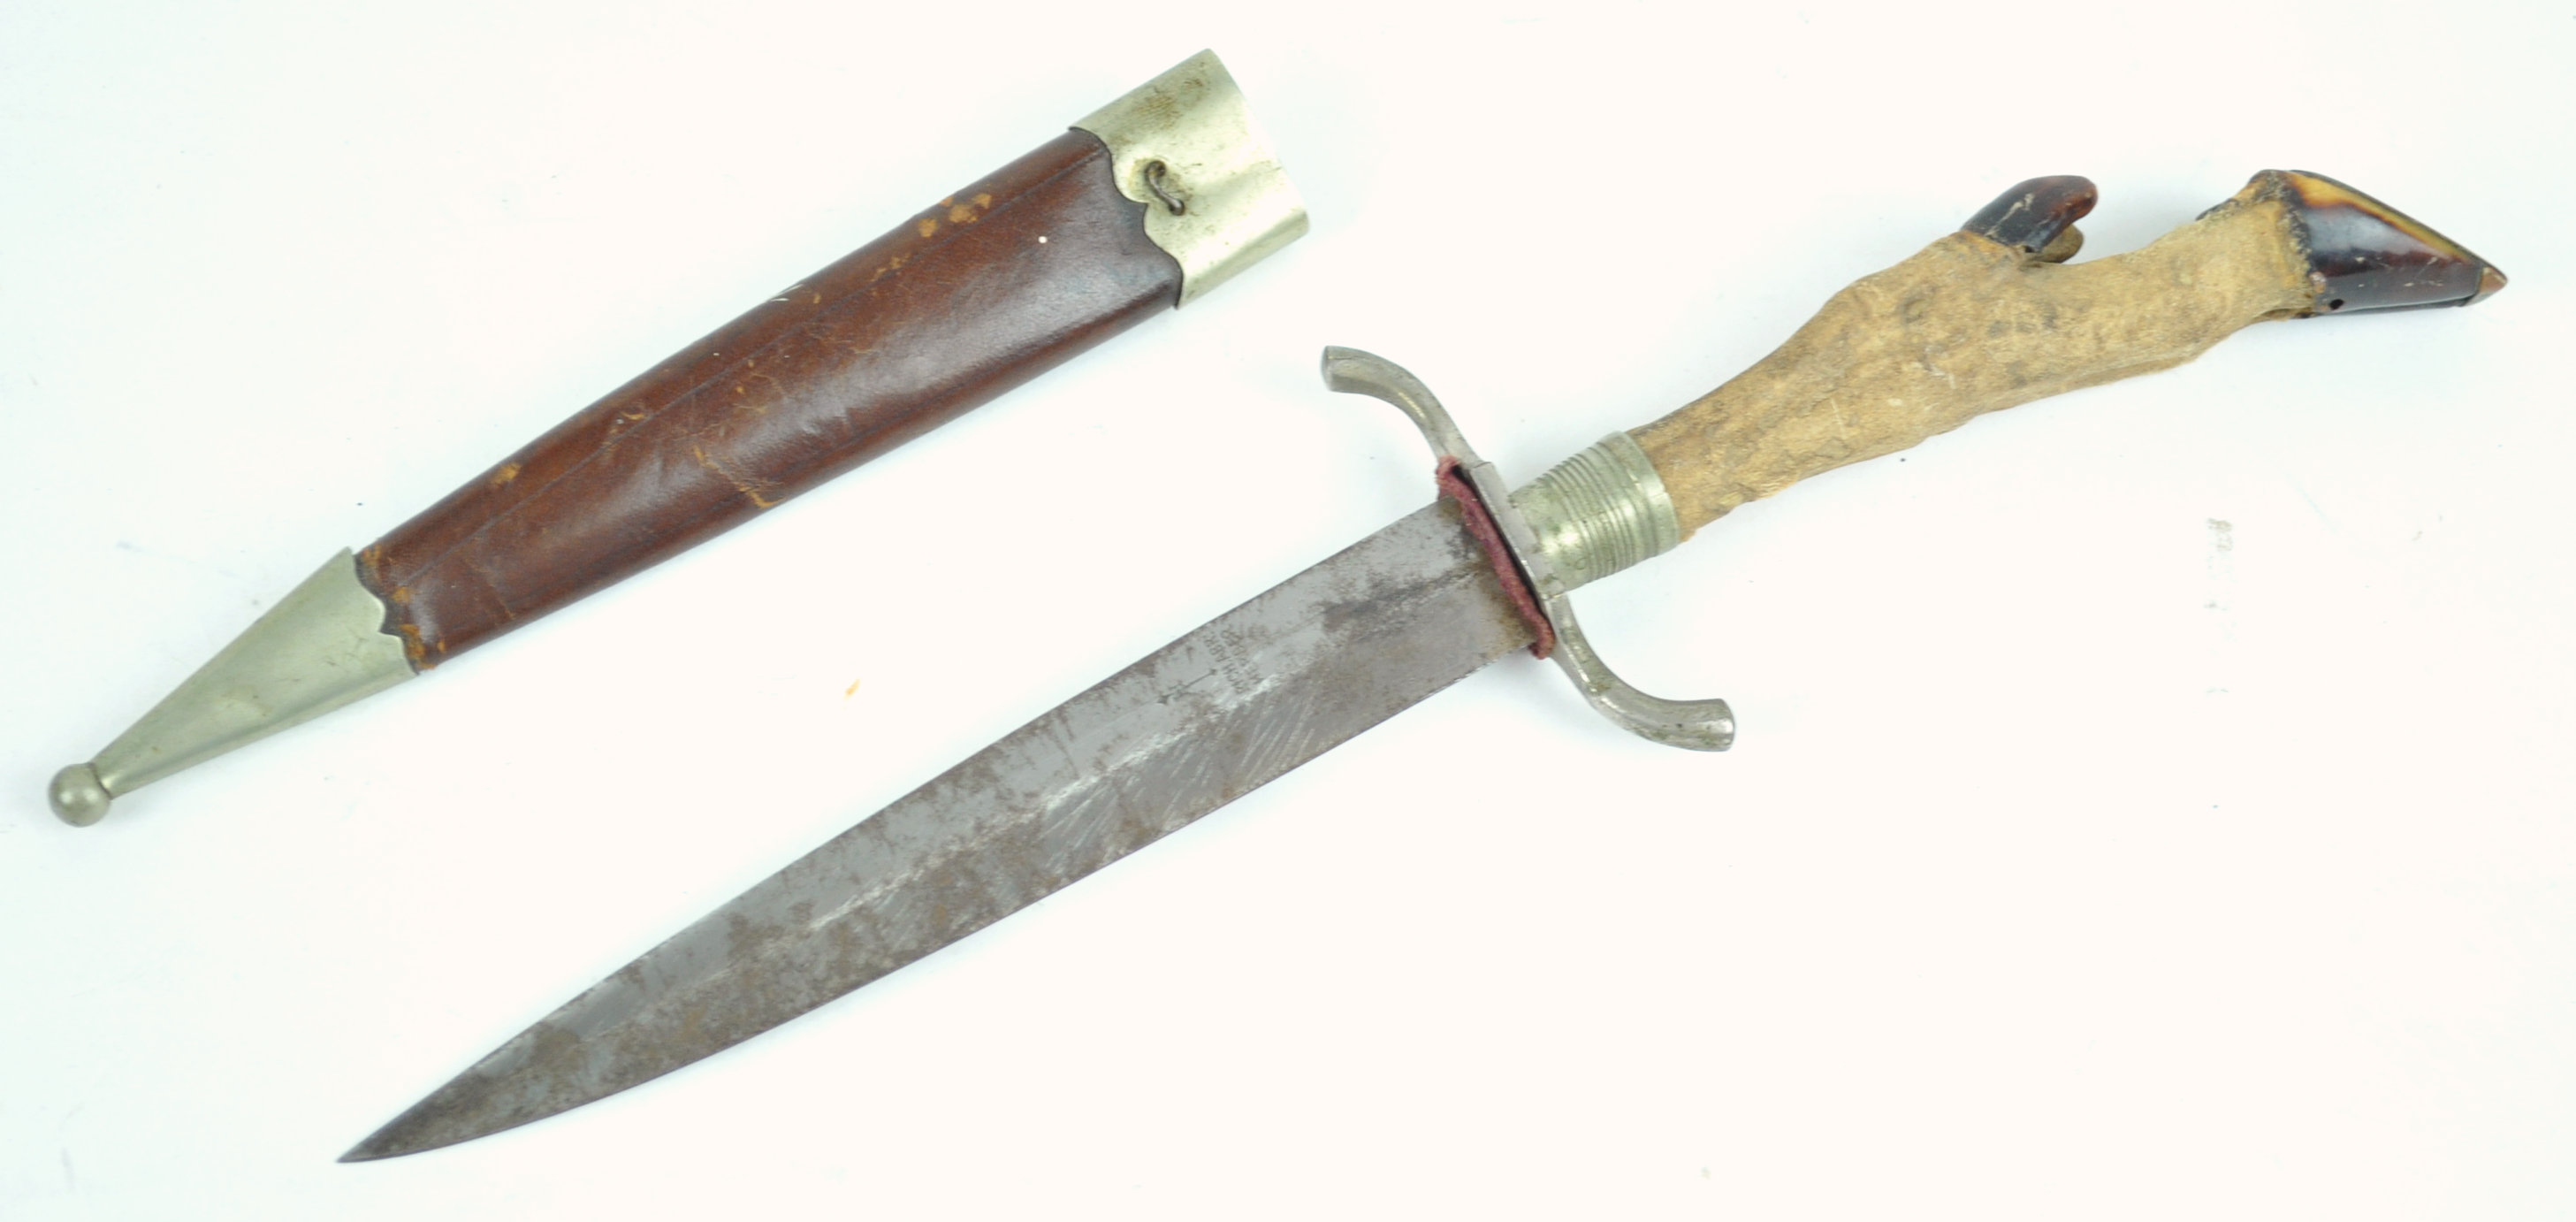 A WWII hunting dagger, marked Rich-ABR-Herder, with leather scabbard and hoof handle, 30.